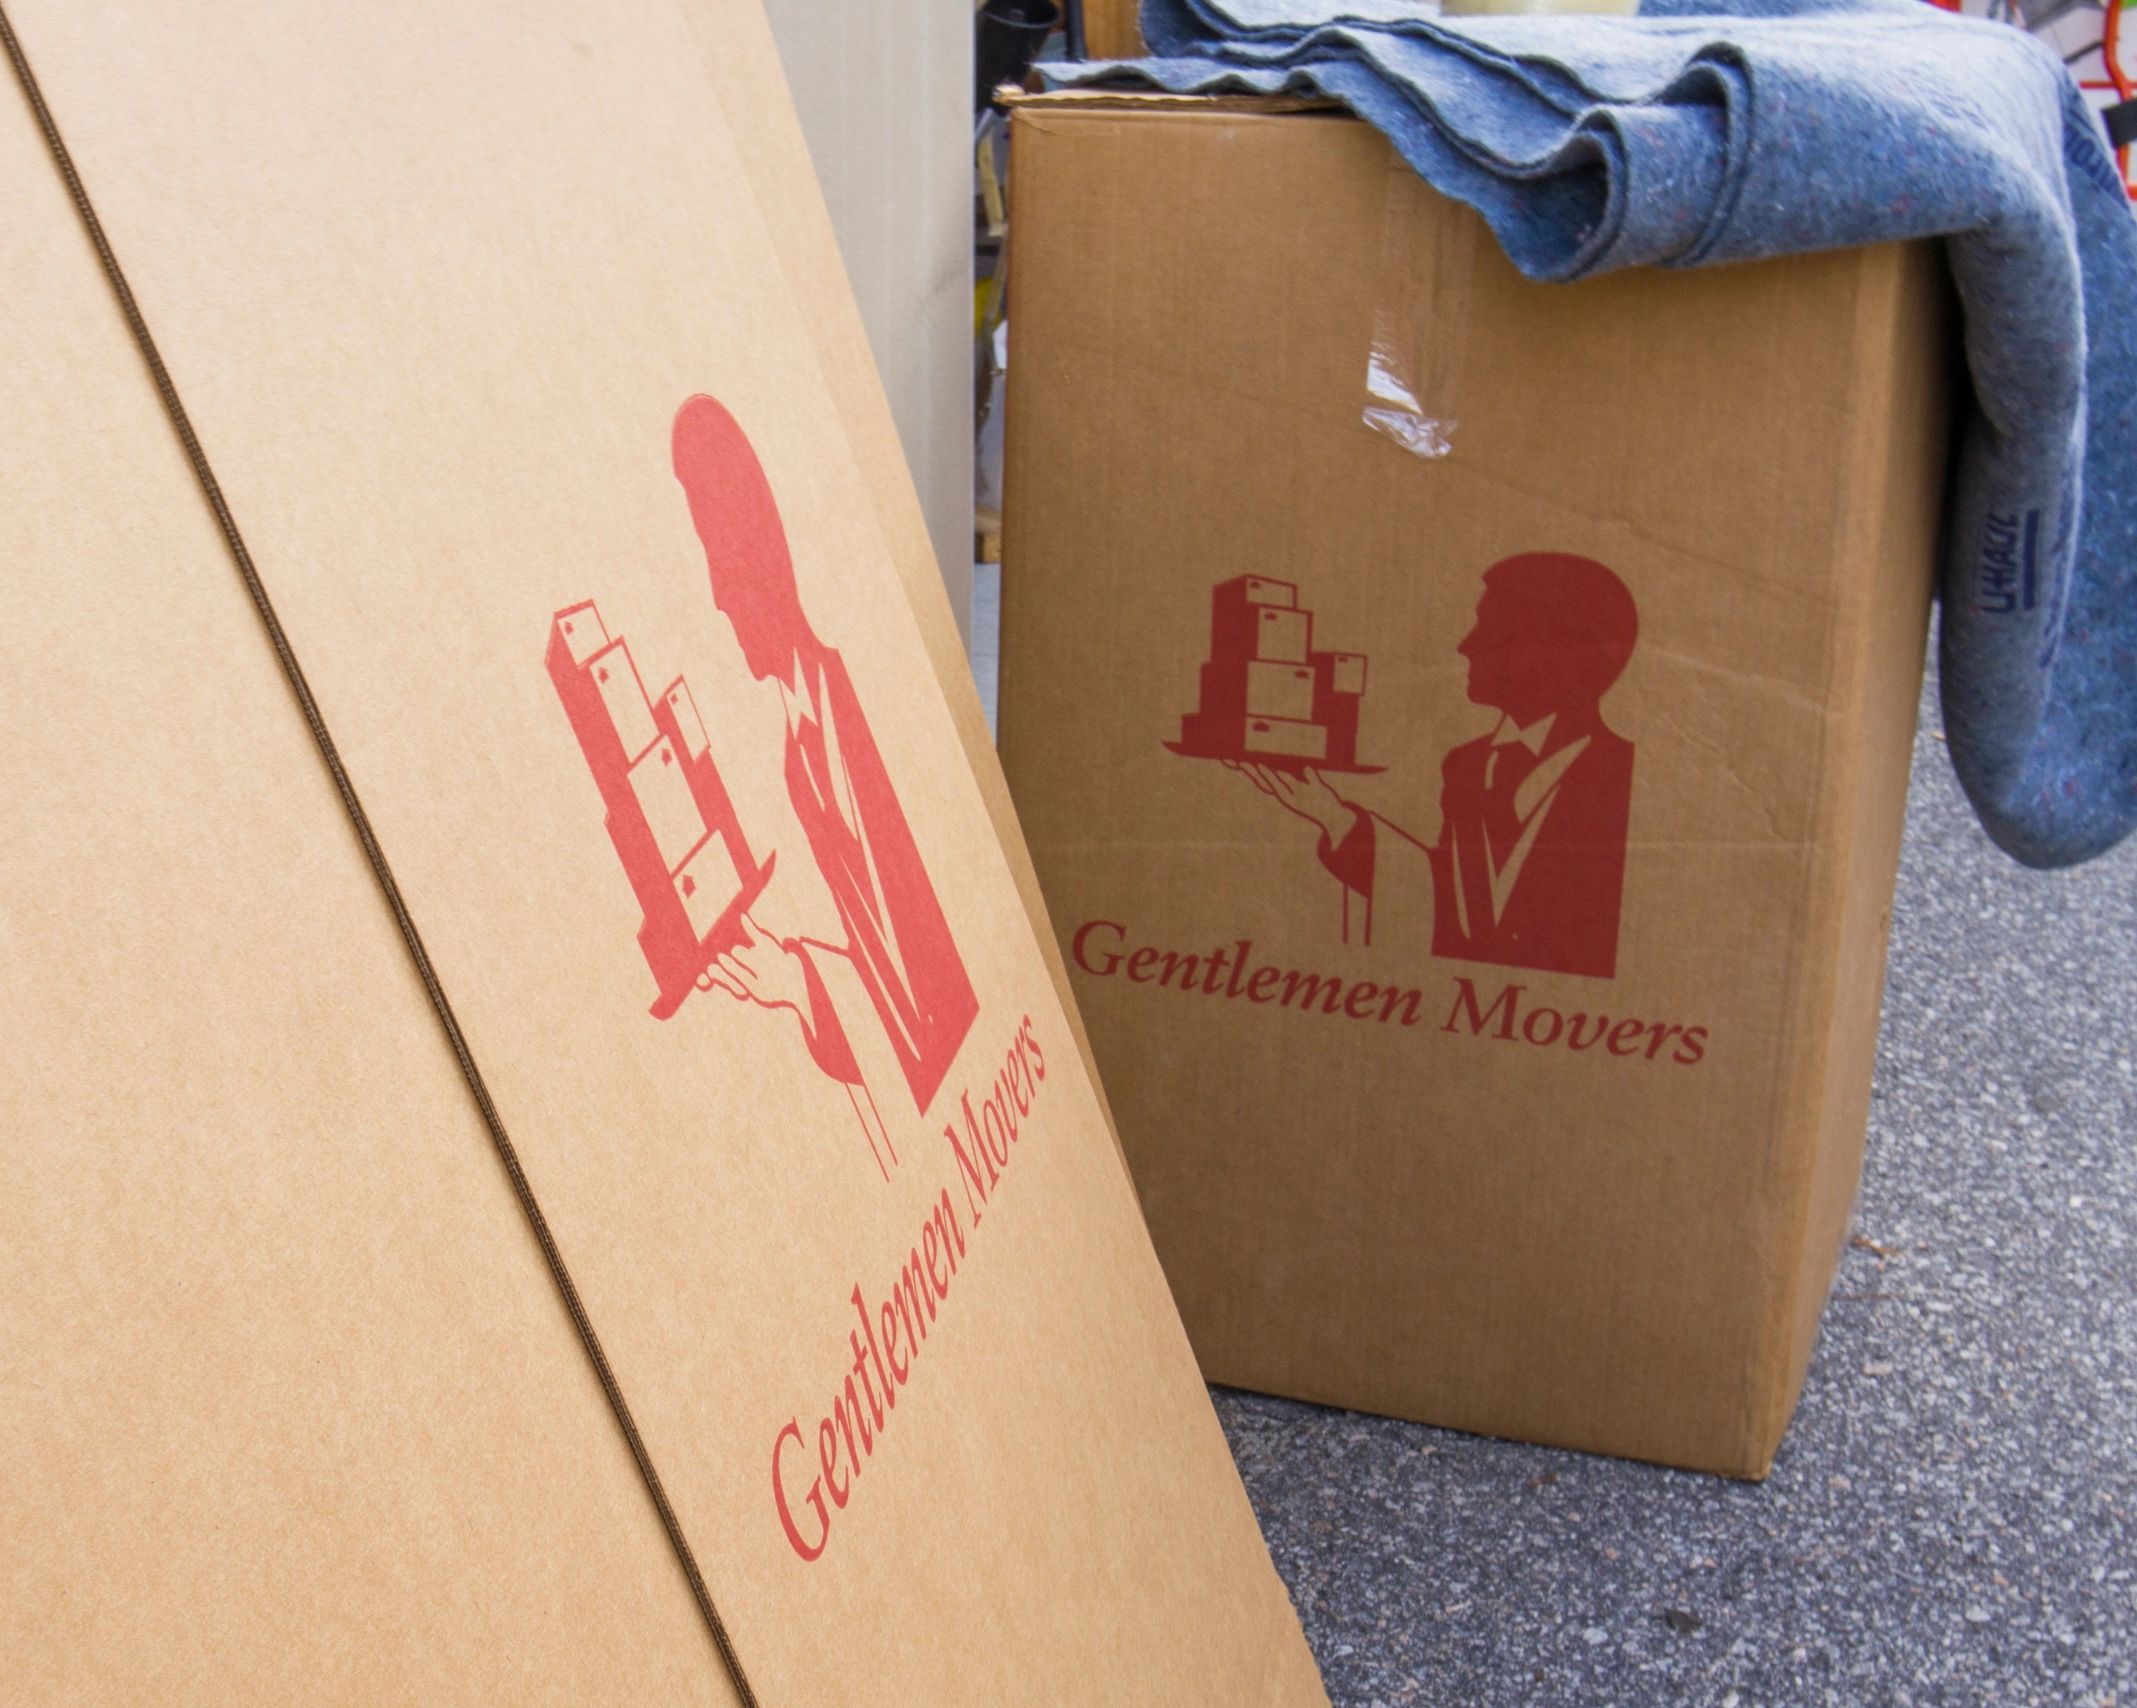 Gentlemen Movers, Moving Company, Packing for a move, Packing Services by a moving company